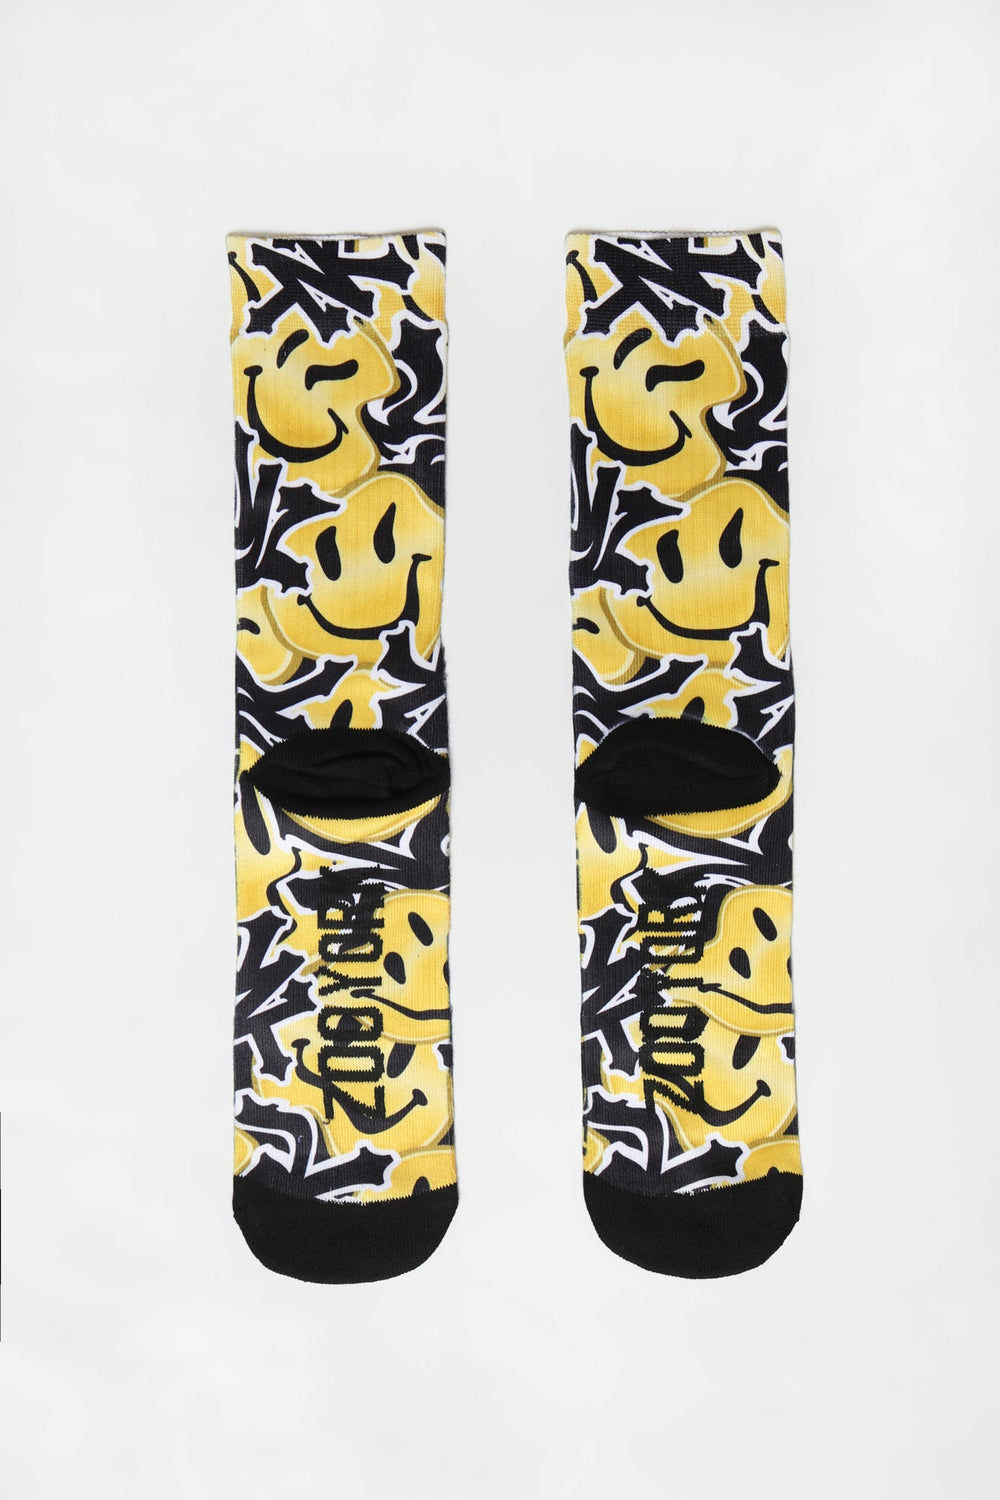 Chaussettes Smiley Zoo York Homme Jaune